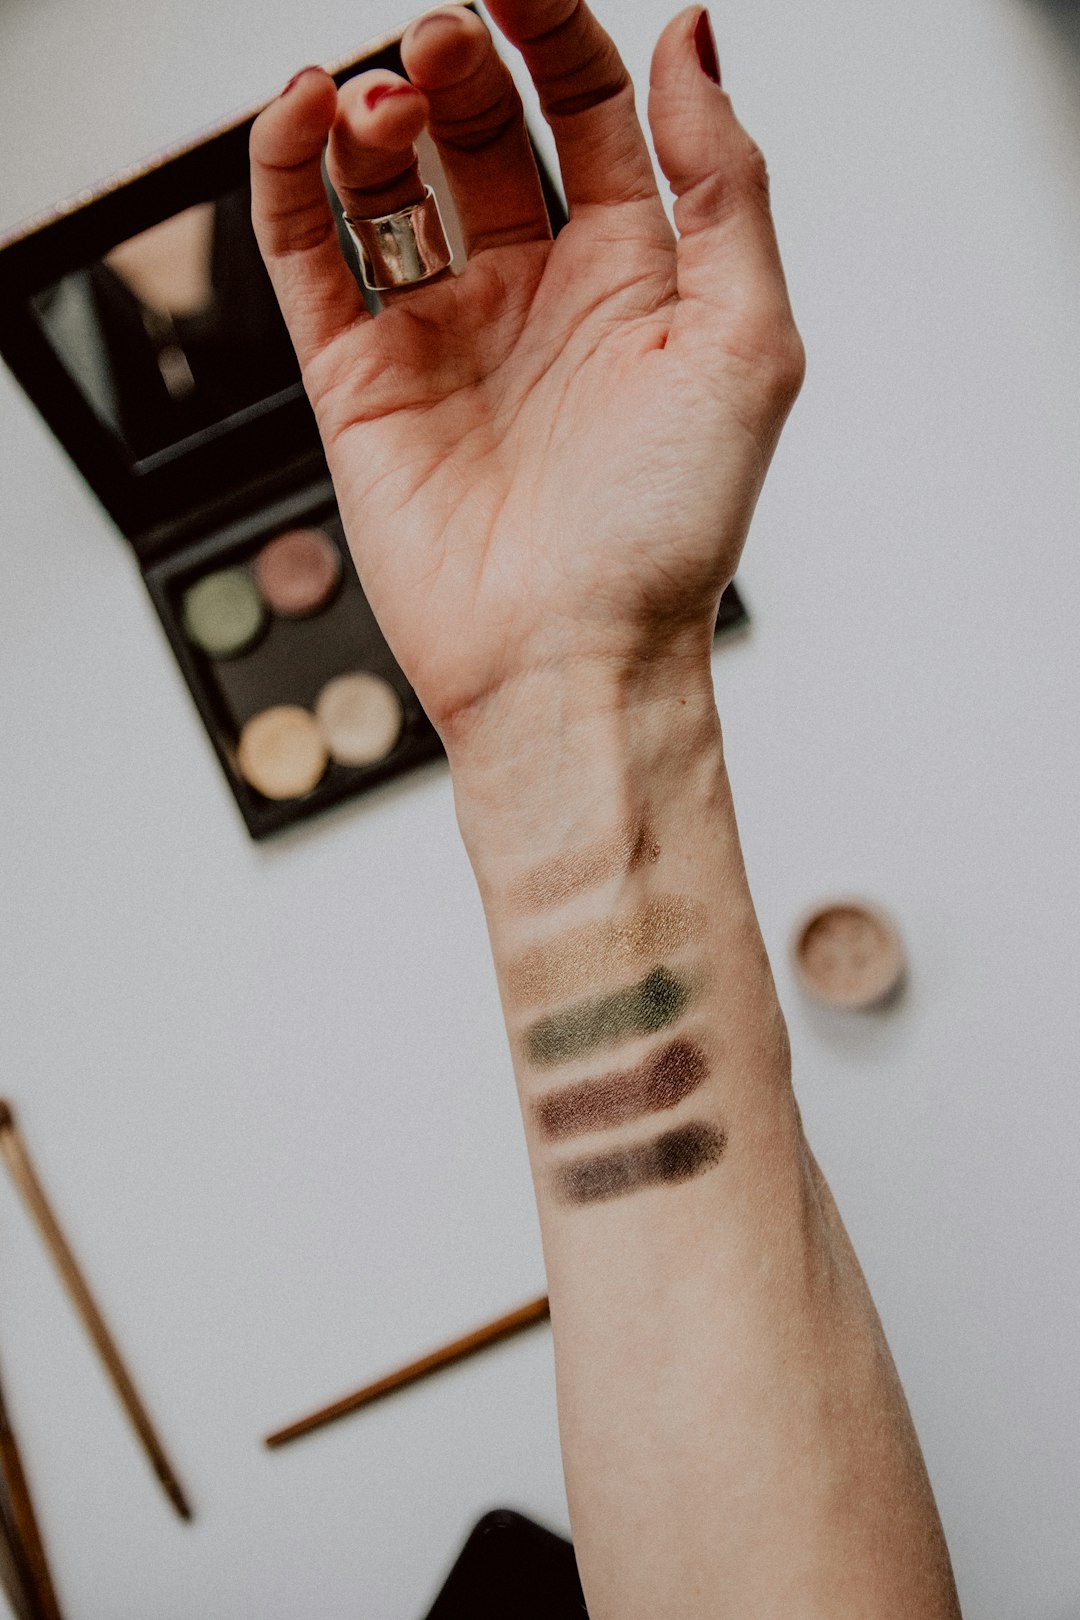 Swatches of eyeshadow testing on a woman's forearm